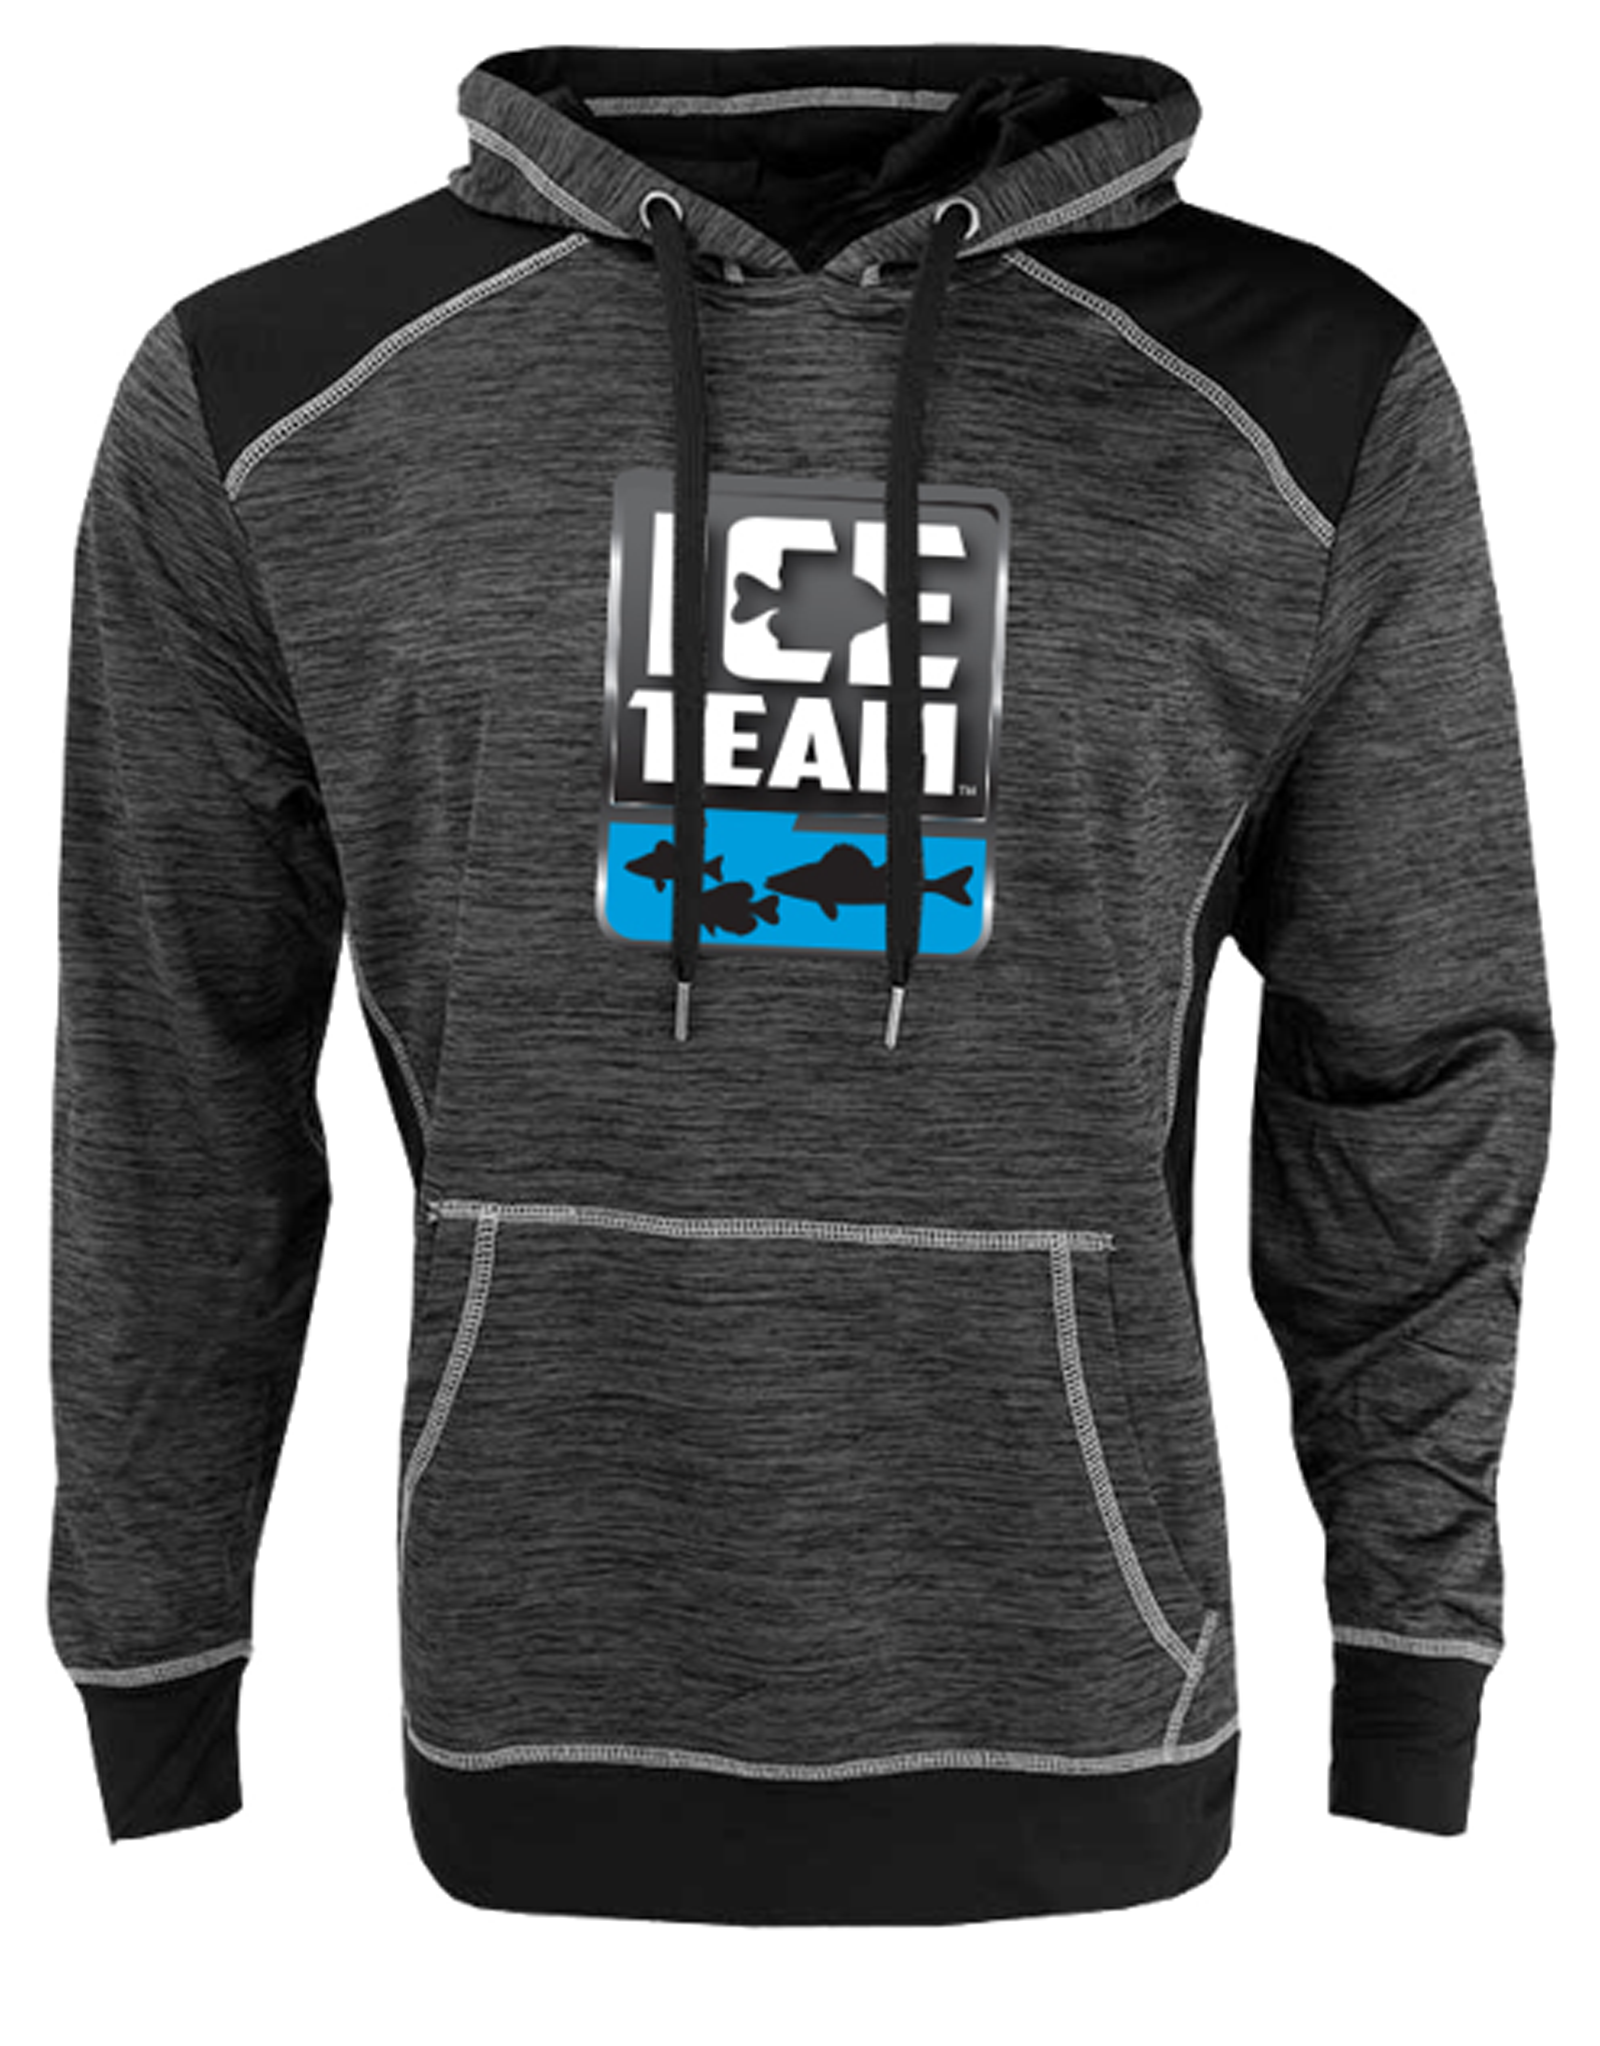 https://static.upnorthsports.com/Image/catimages/clamiceteamhoodie-1600.png